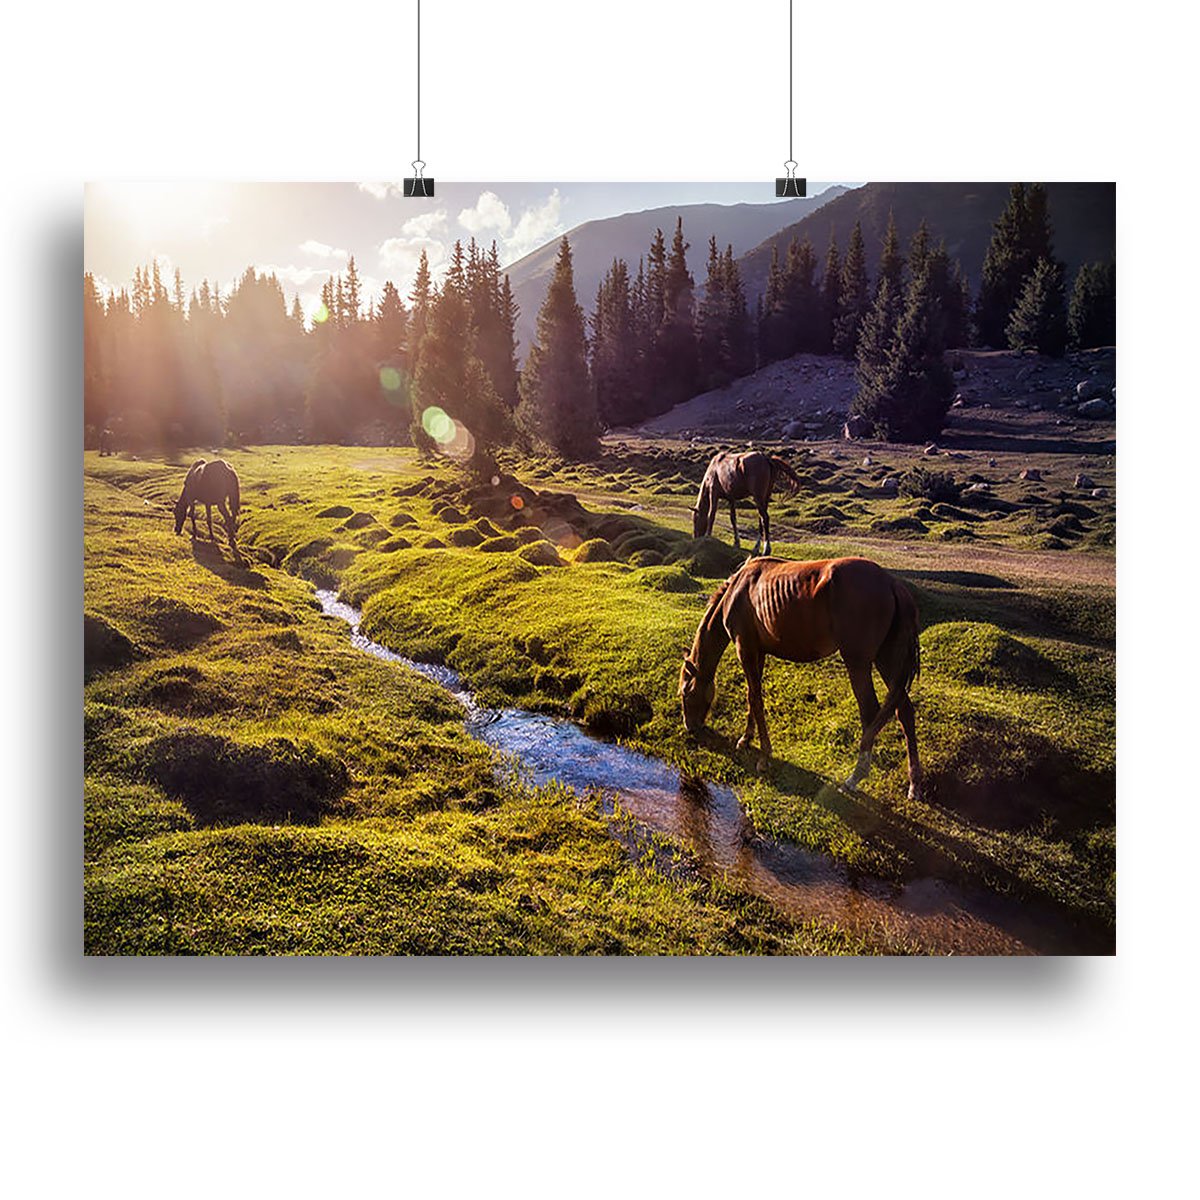 Horses in the Gregory gorge mountains Canvas Print or Poster